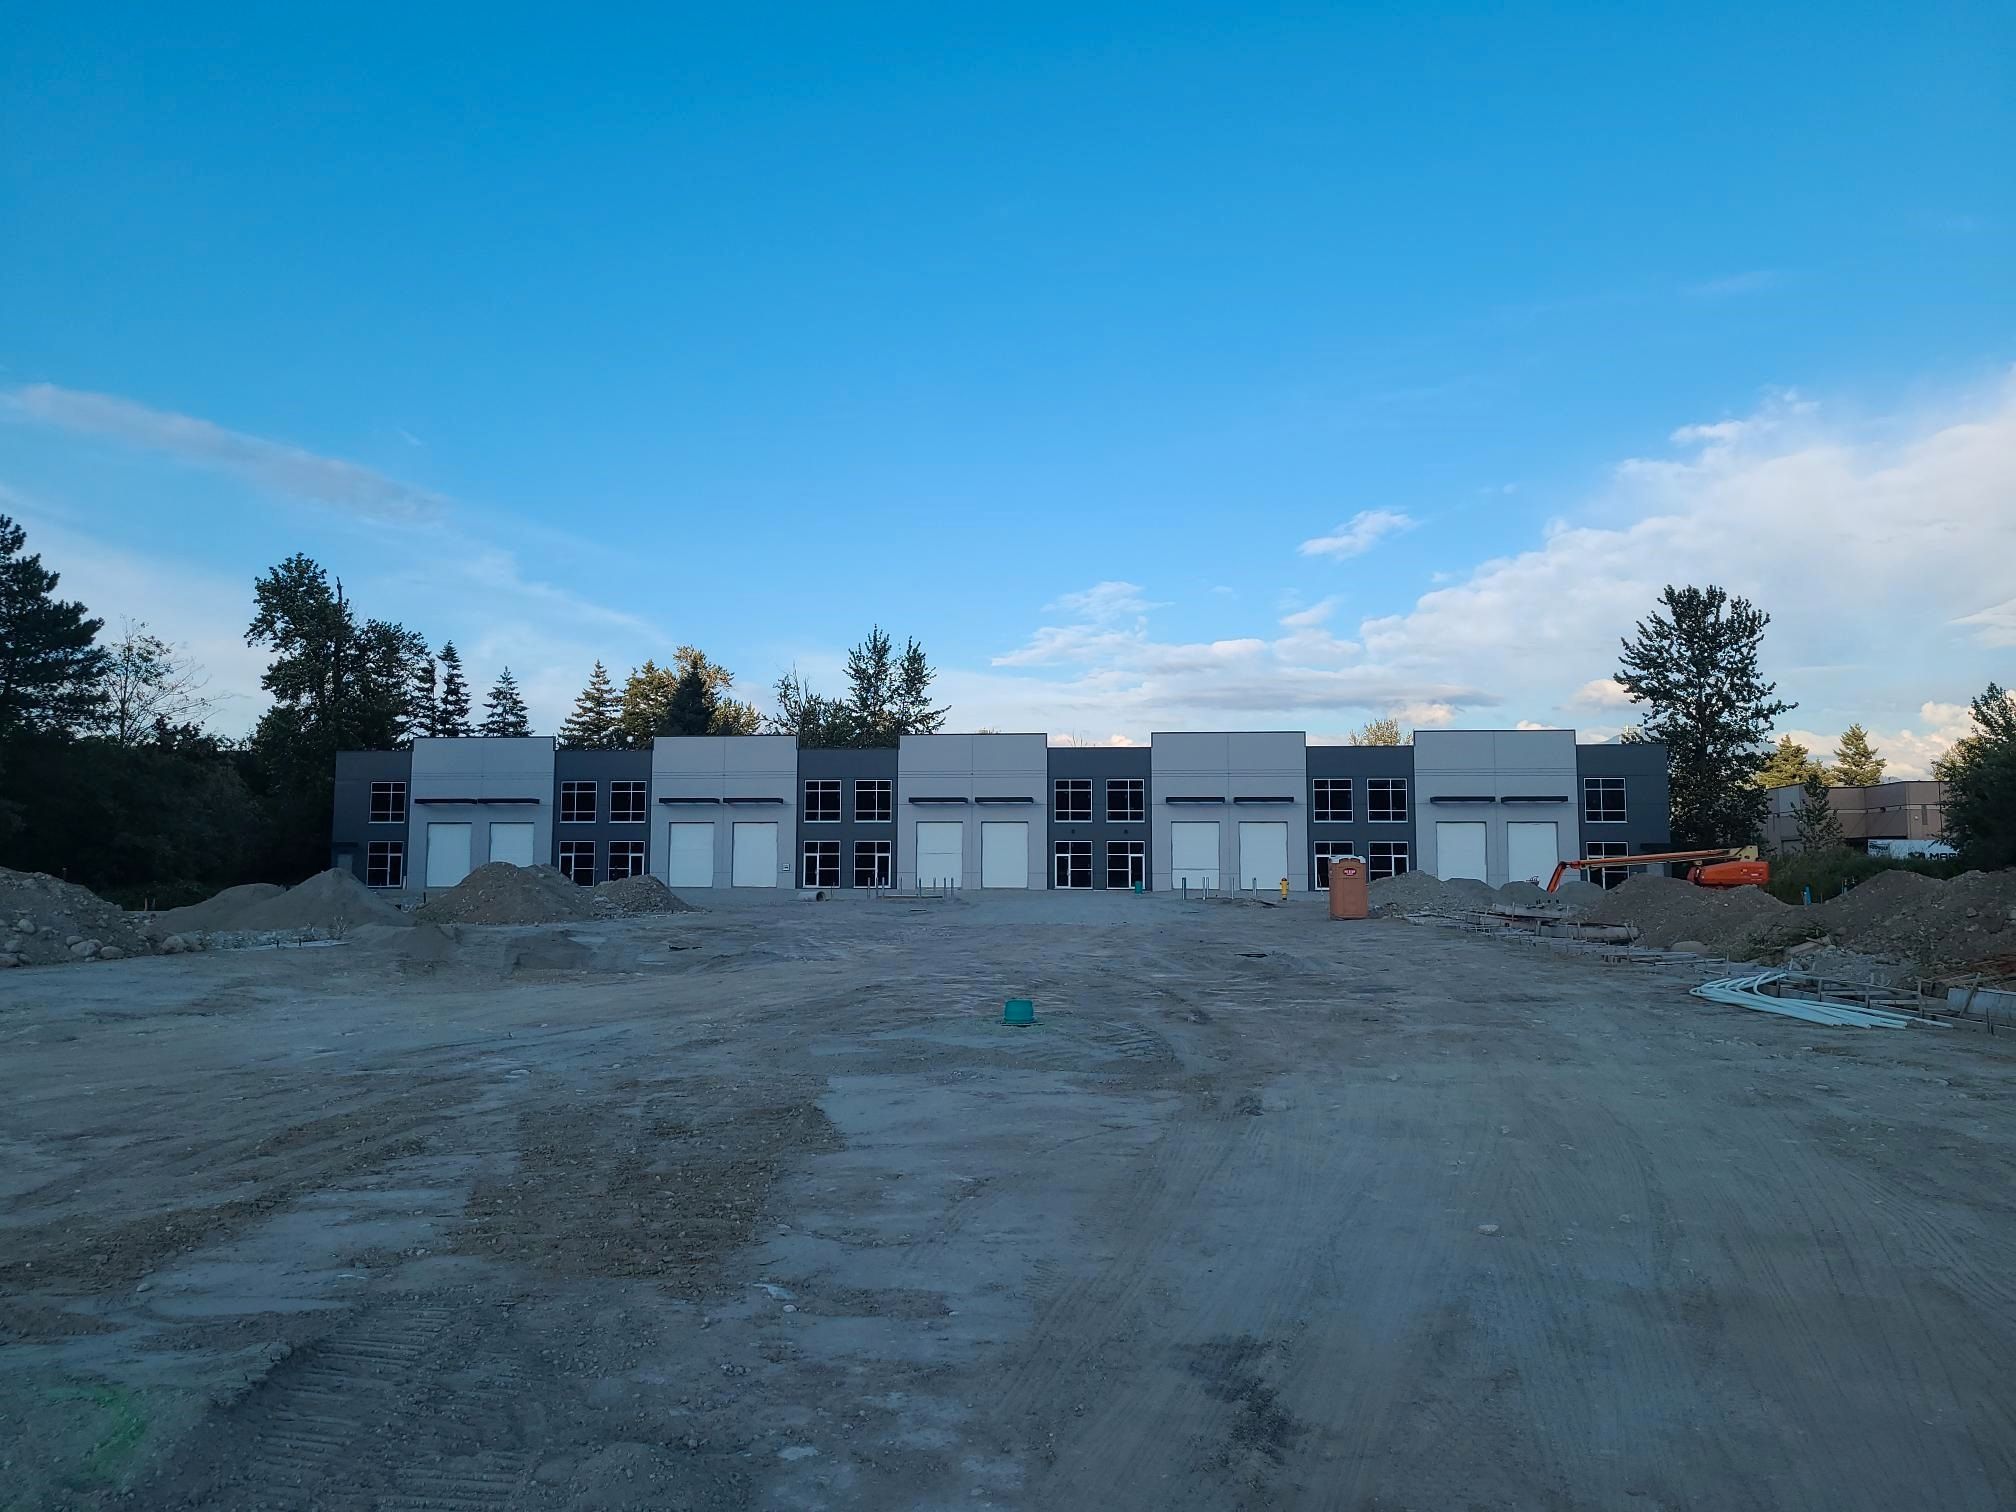 Main Photo: 310 7990 LICKMAN Road in Chilliwack: West Chilliwack Industrial for lease : MLS®# C8052912